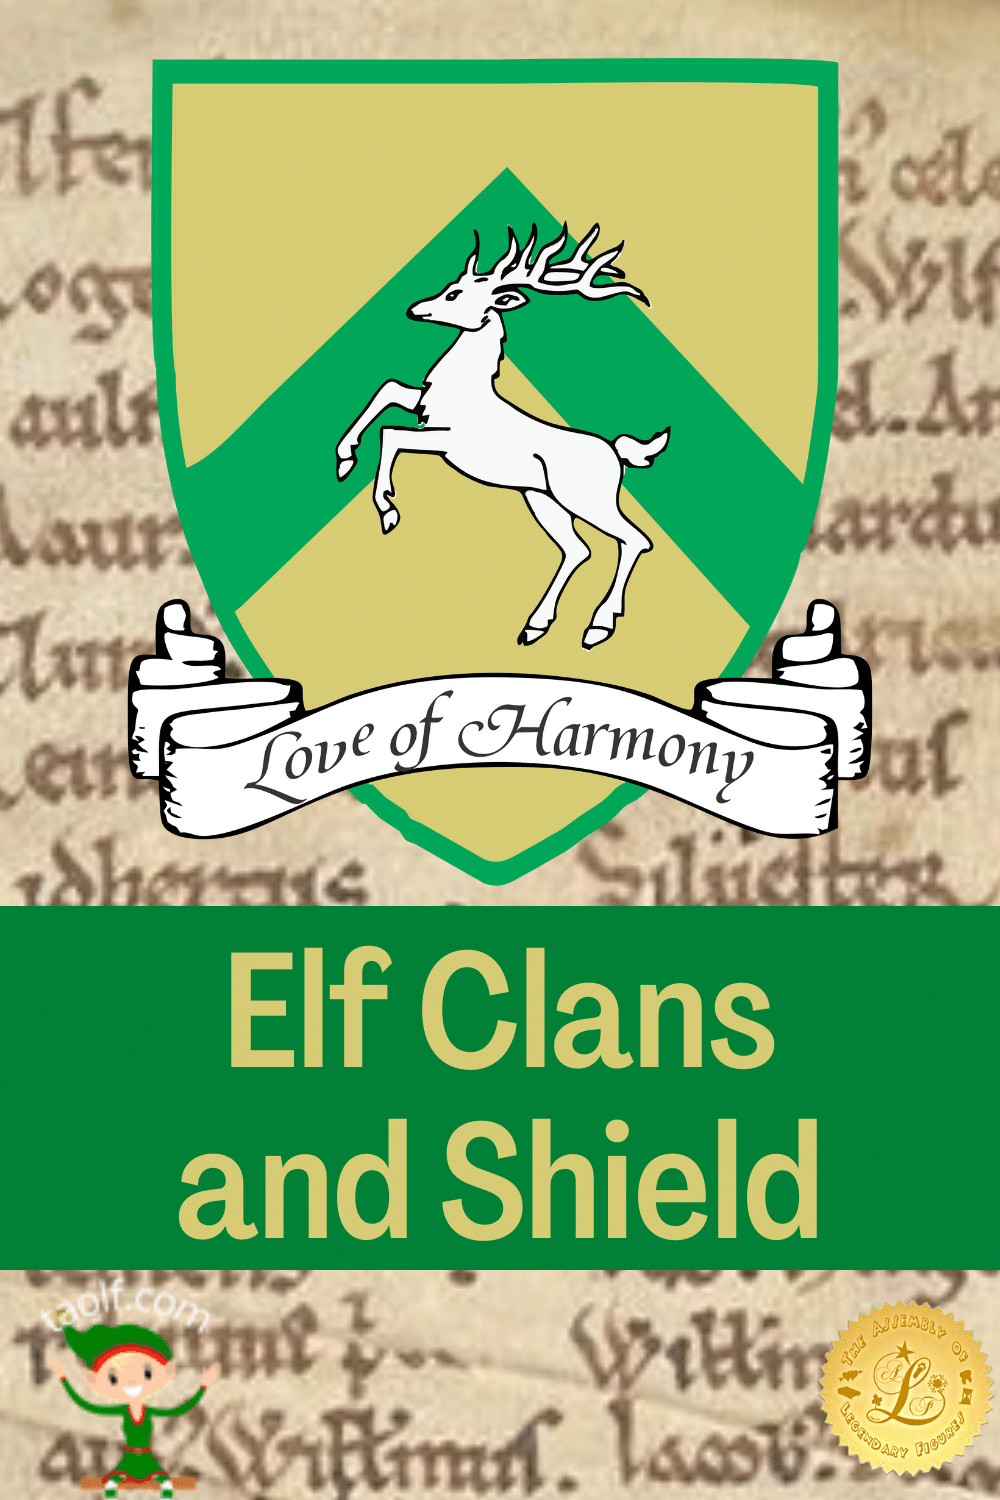 Research on Elf Clans and Shield Performed